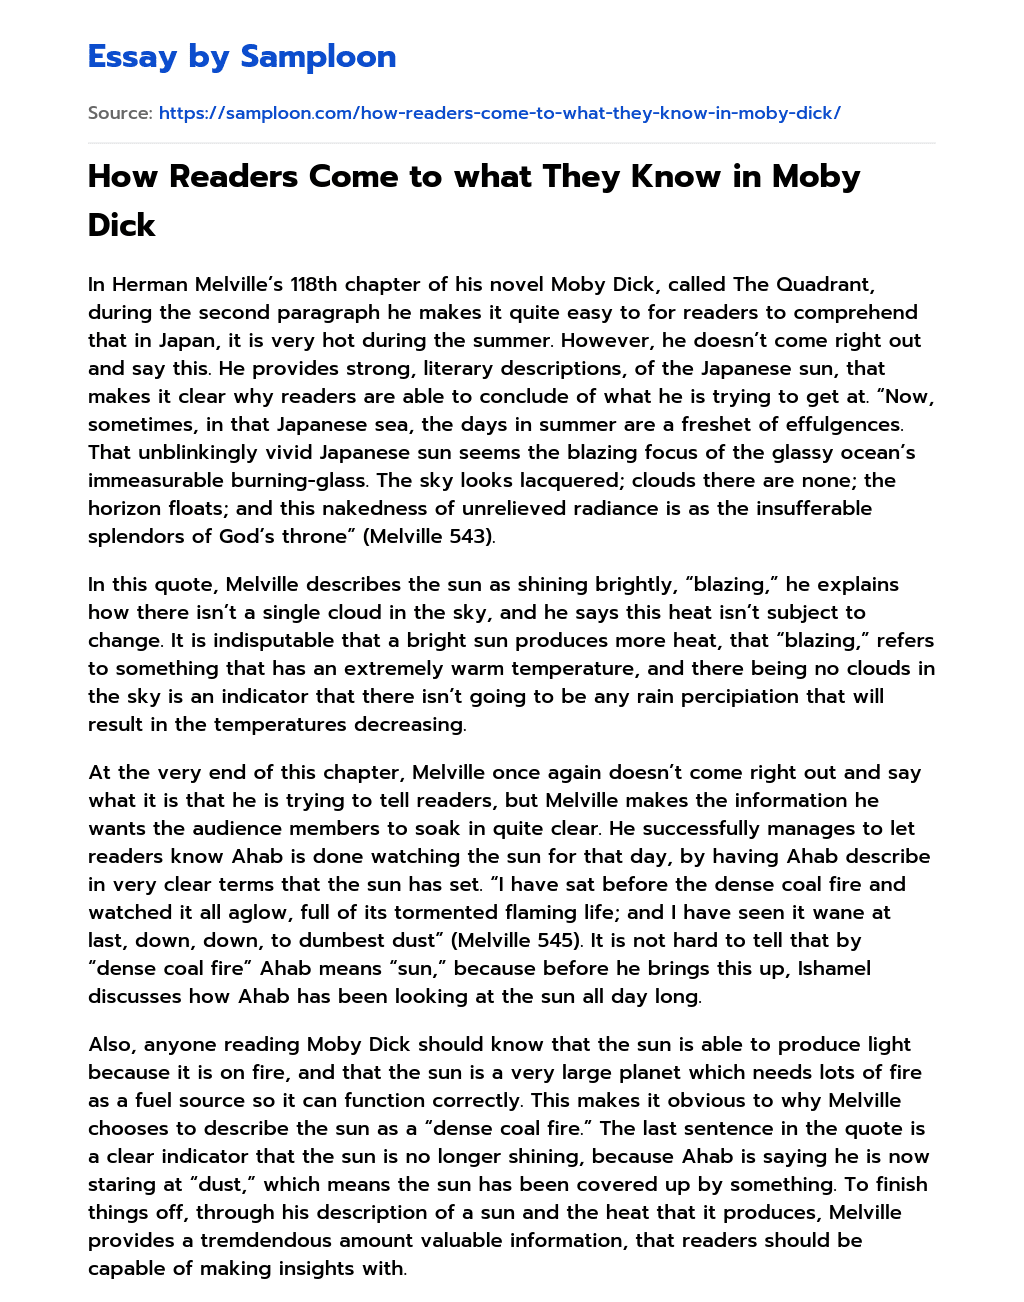 How Readers Come to what They Know in Moby Dick essay